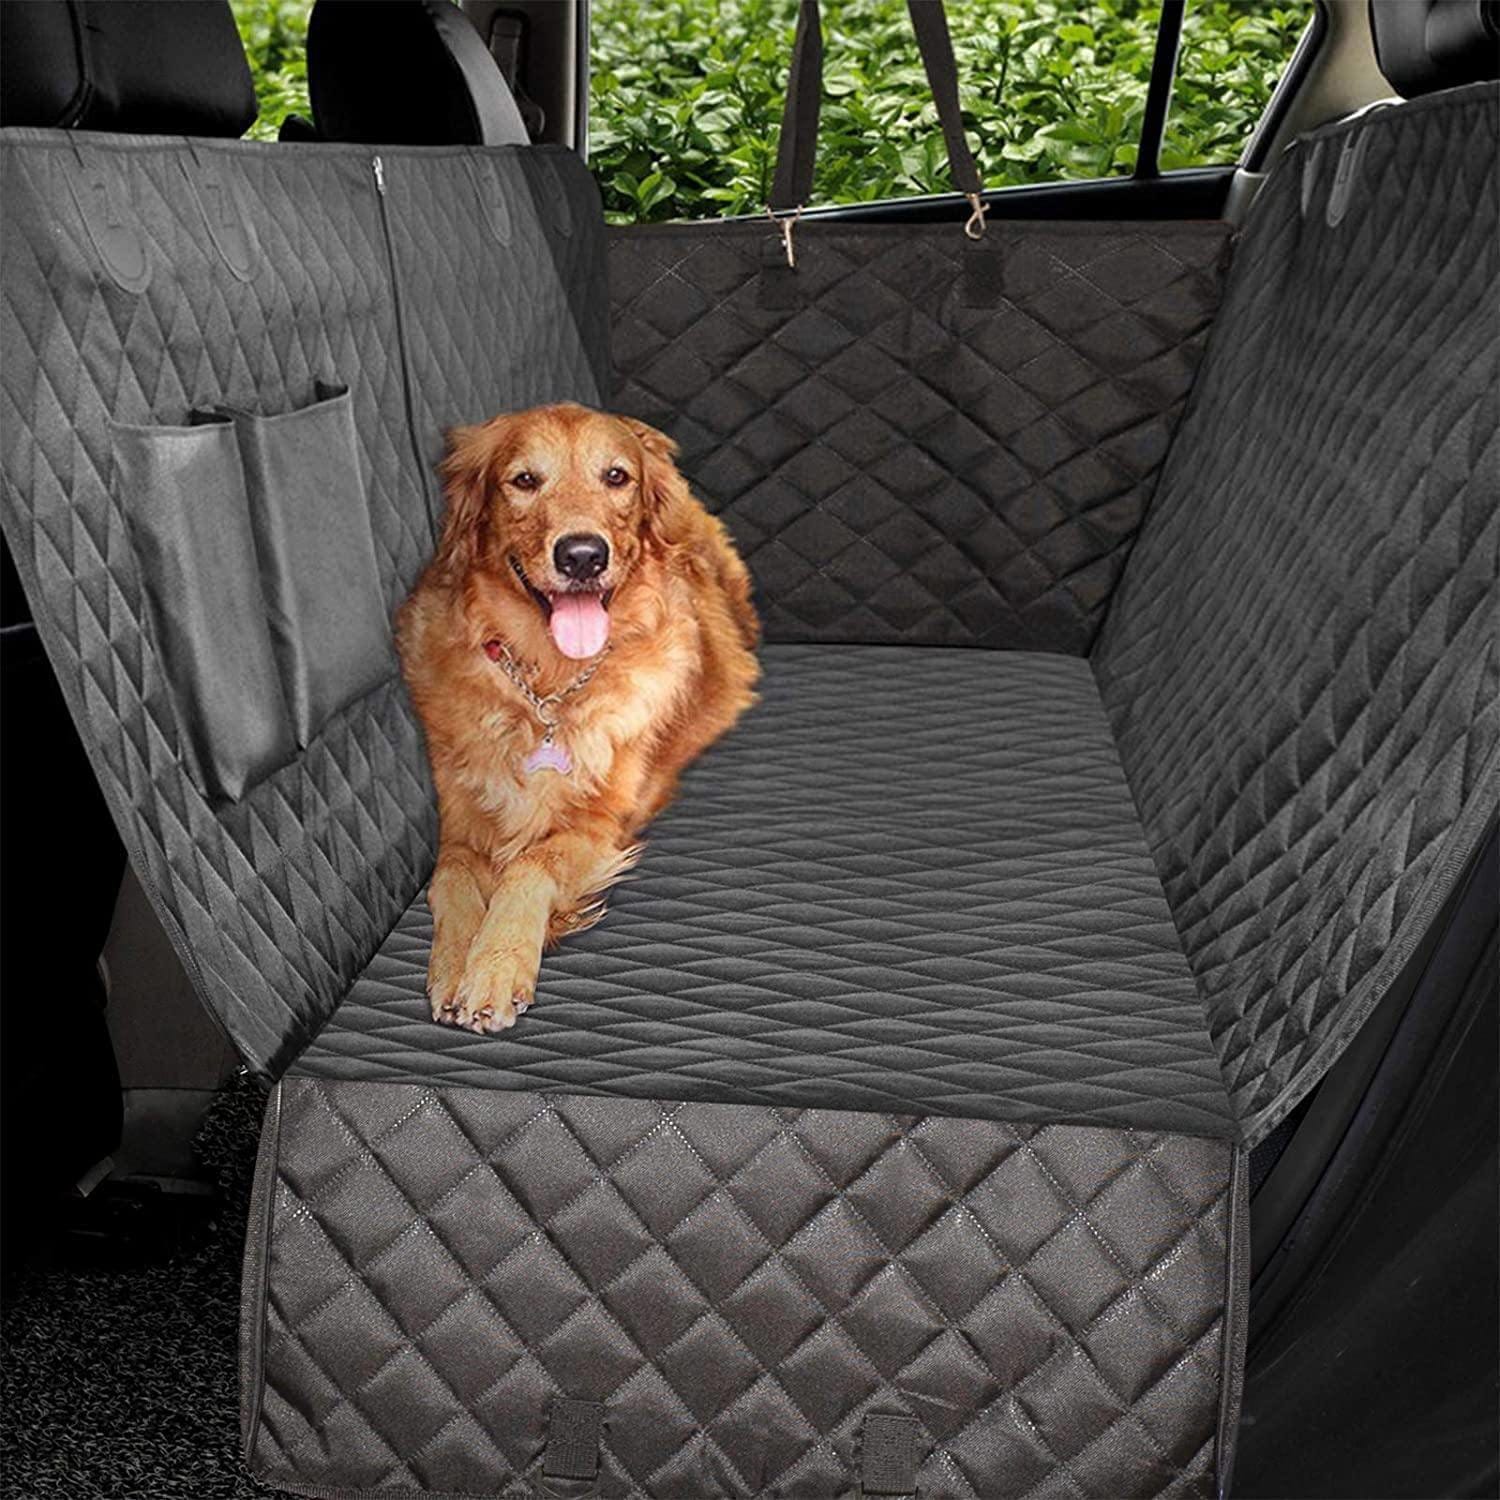 When Do You Use A Dog Seat Cover Or A Dog Carrier For Your Car?